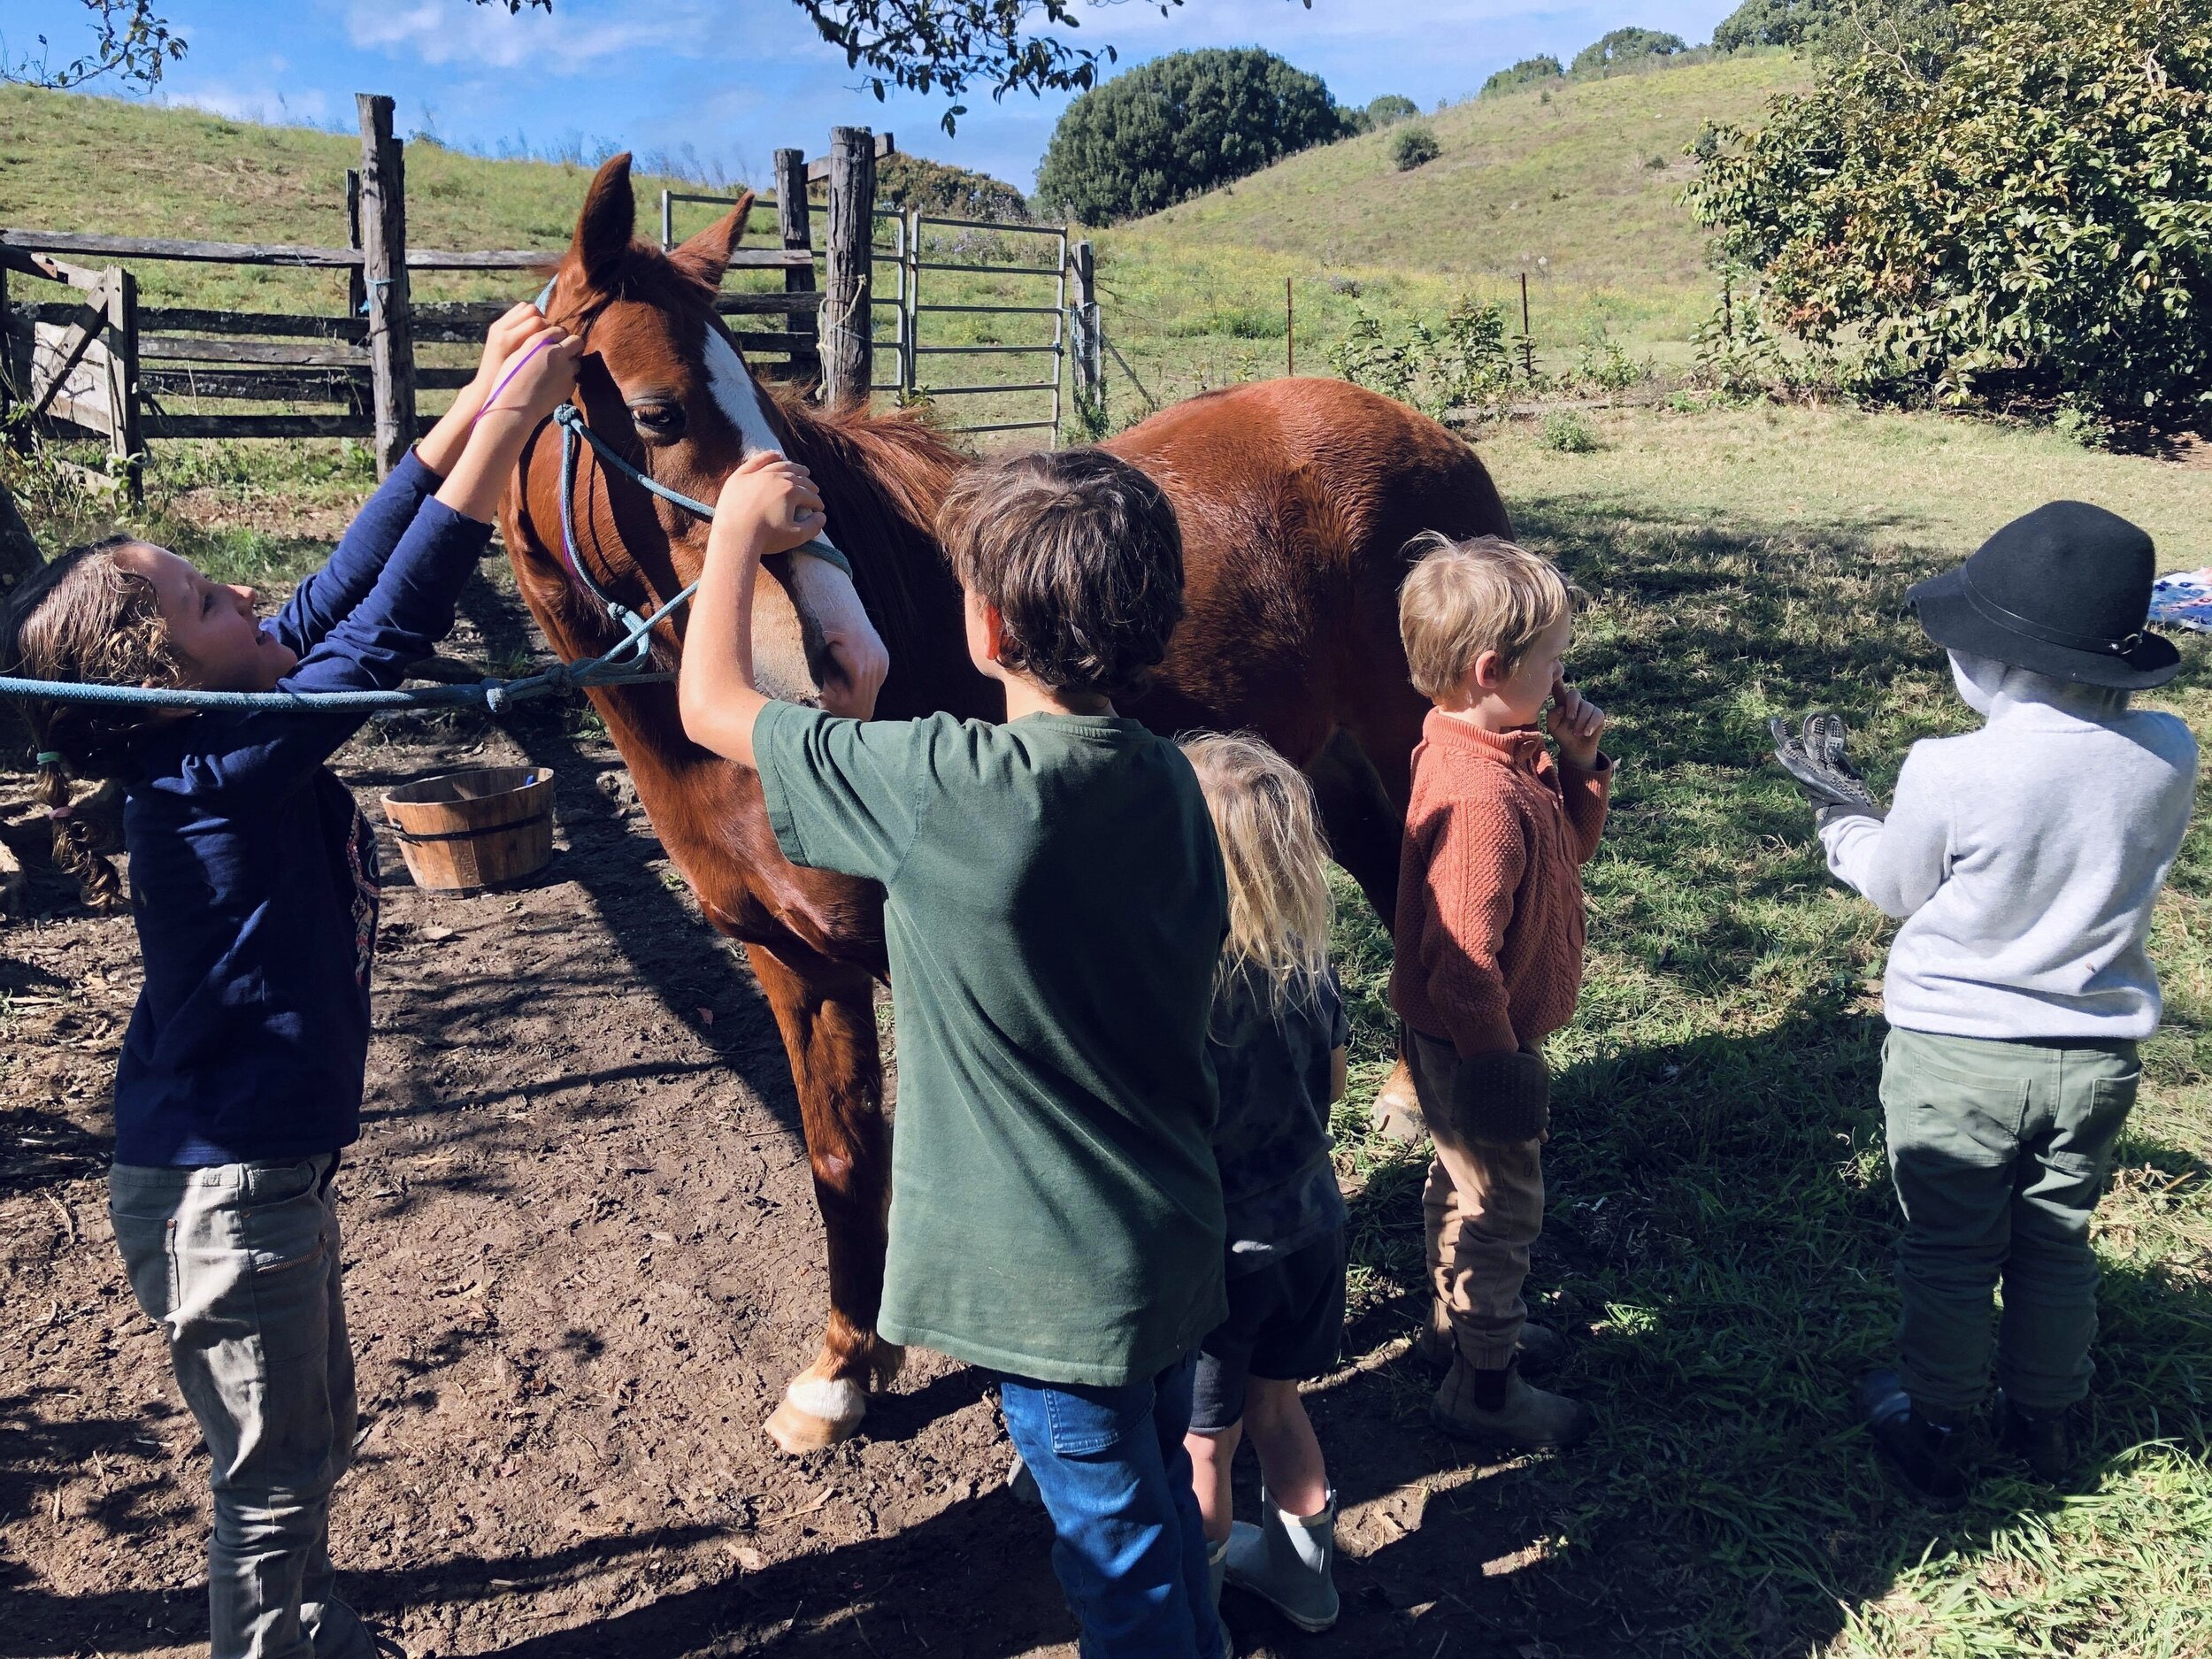 Breathwork meditation cacao ceremony mindfulness Love Connection loving kindness woman’s circle sacred sisters one with nature conscious Connections horse lover nature lover 899.jpg